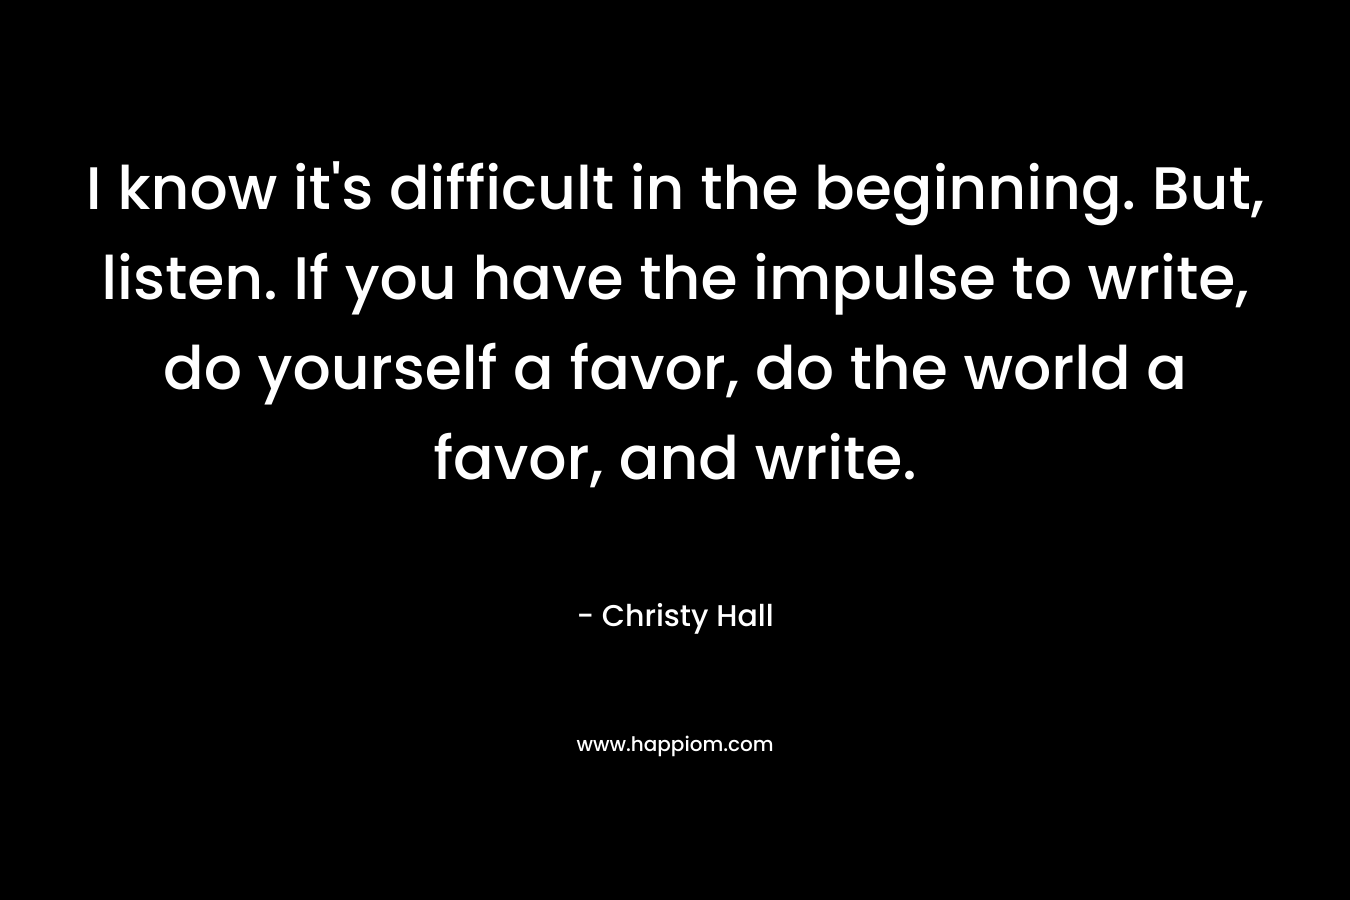 I know it's difficult in the beginning. But, listen. If you have the impulse to write, do yourself a favor, do the world a favor, and write.